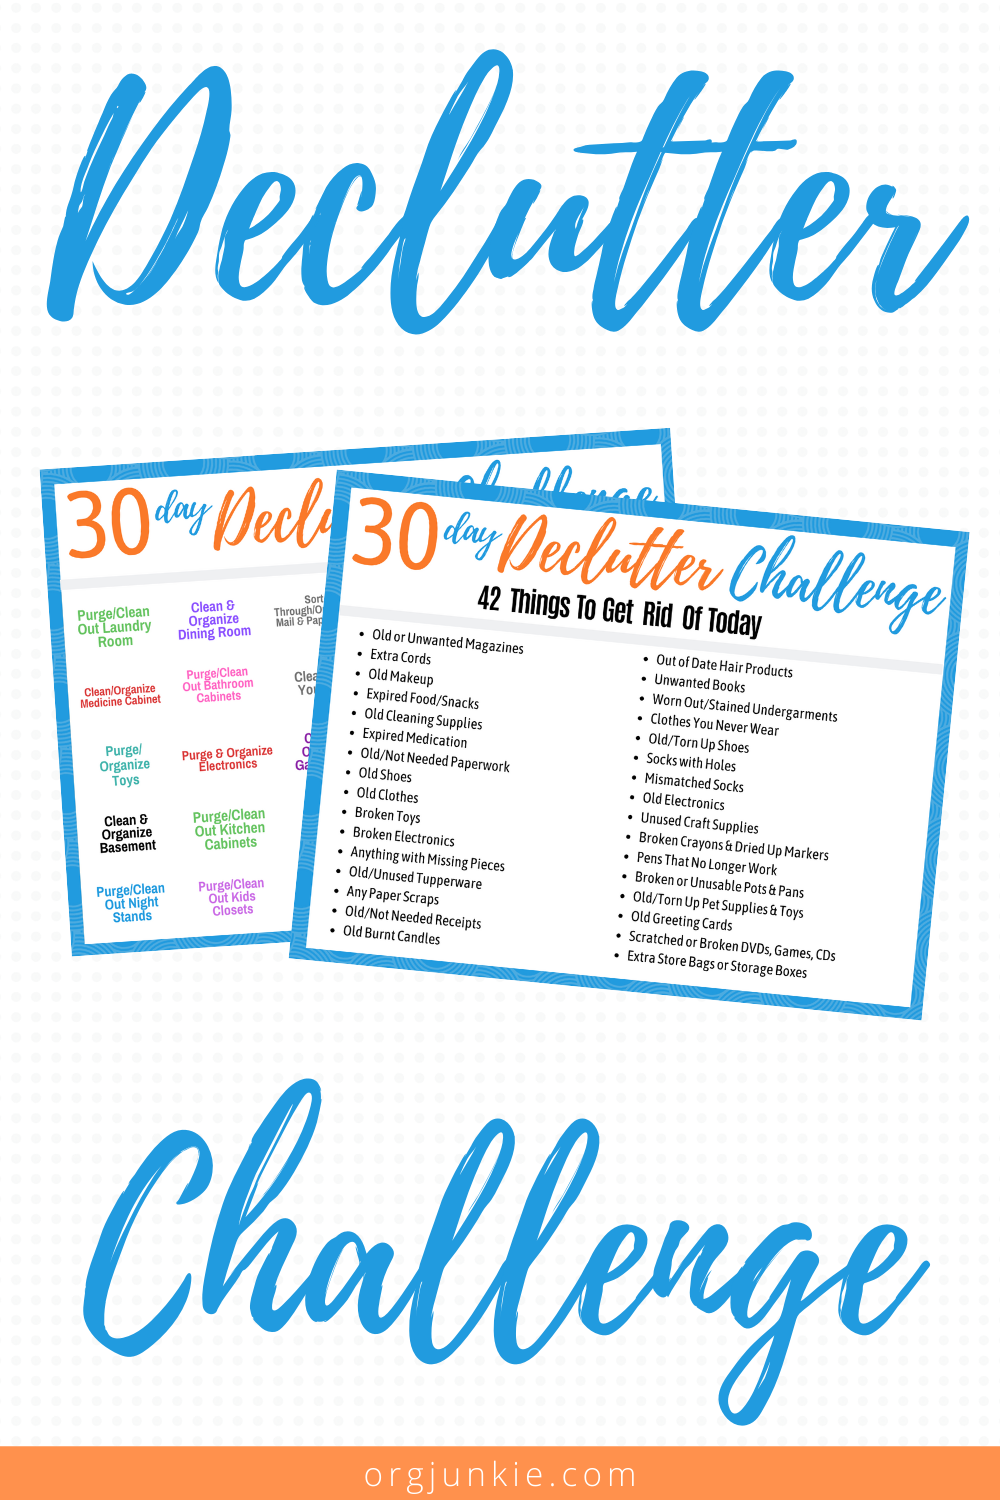 30 Day Declutter Challenge with Free Declutter Printables to Help! at I'm an Organizing Junkie